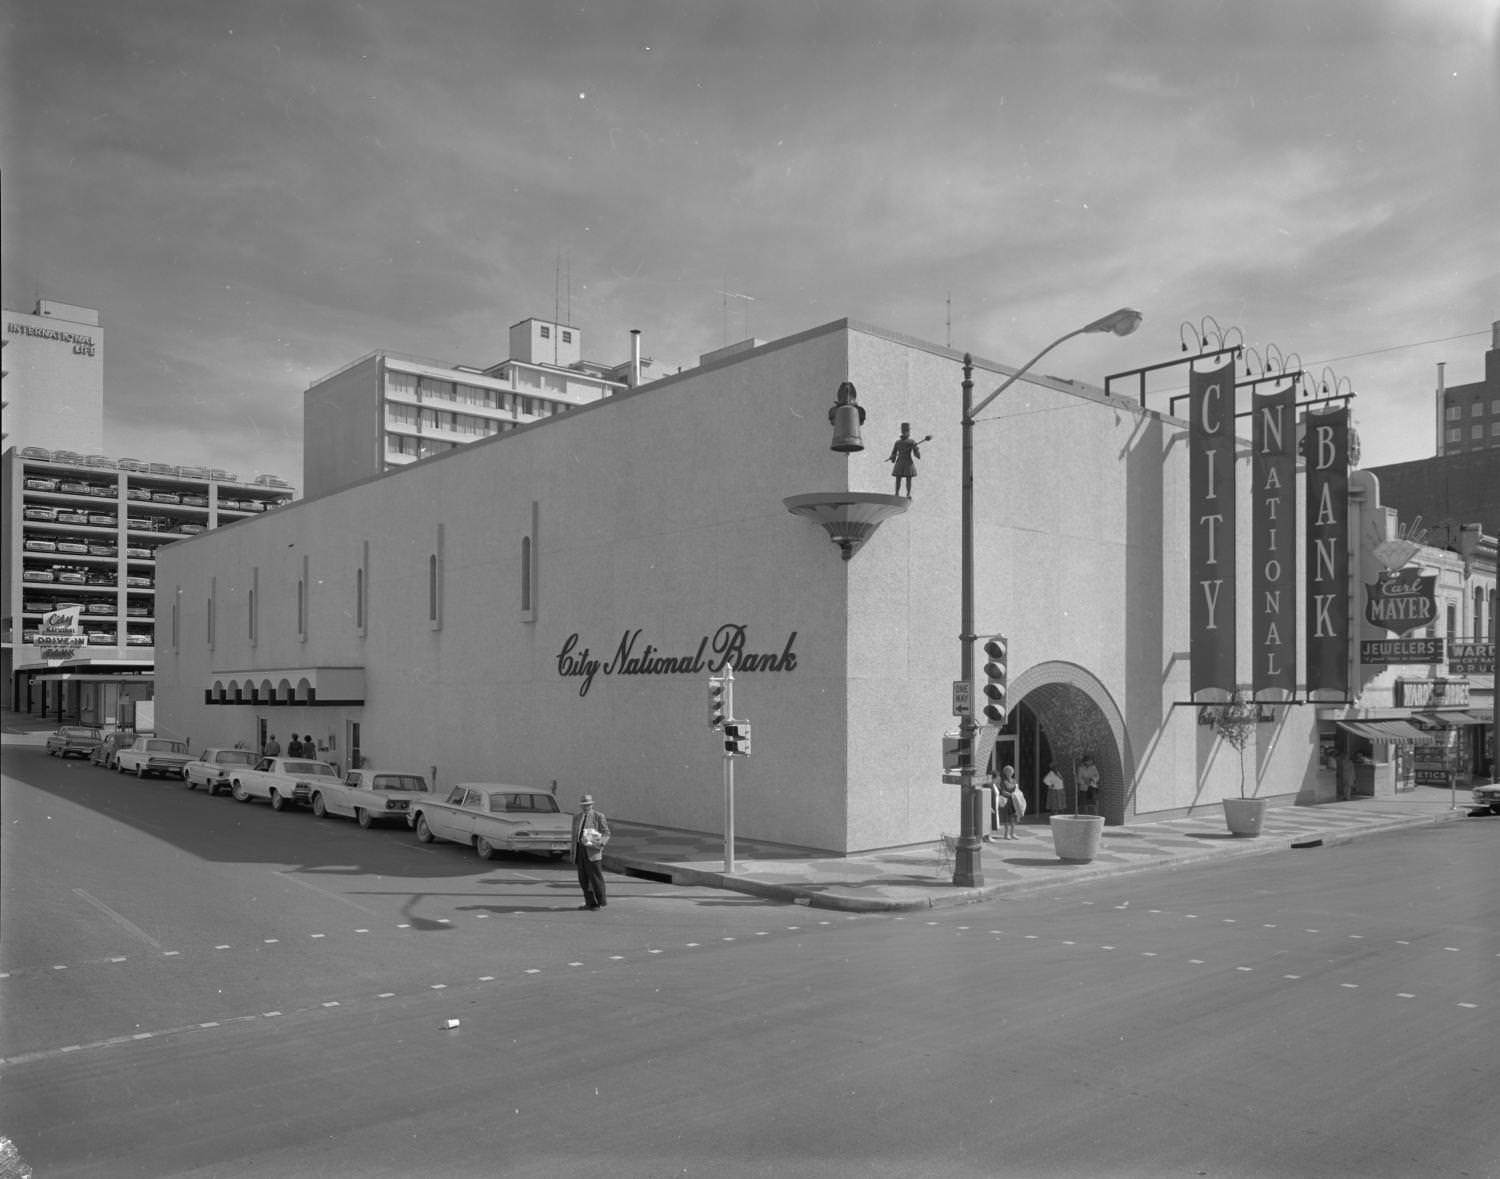 The since demolished City National Bank, located on 819 Congress Avenue, 1964